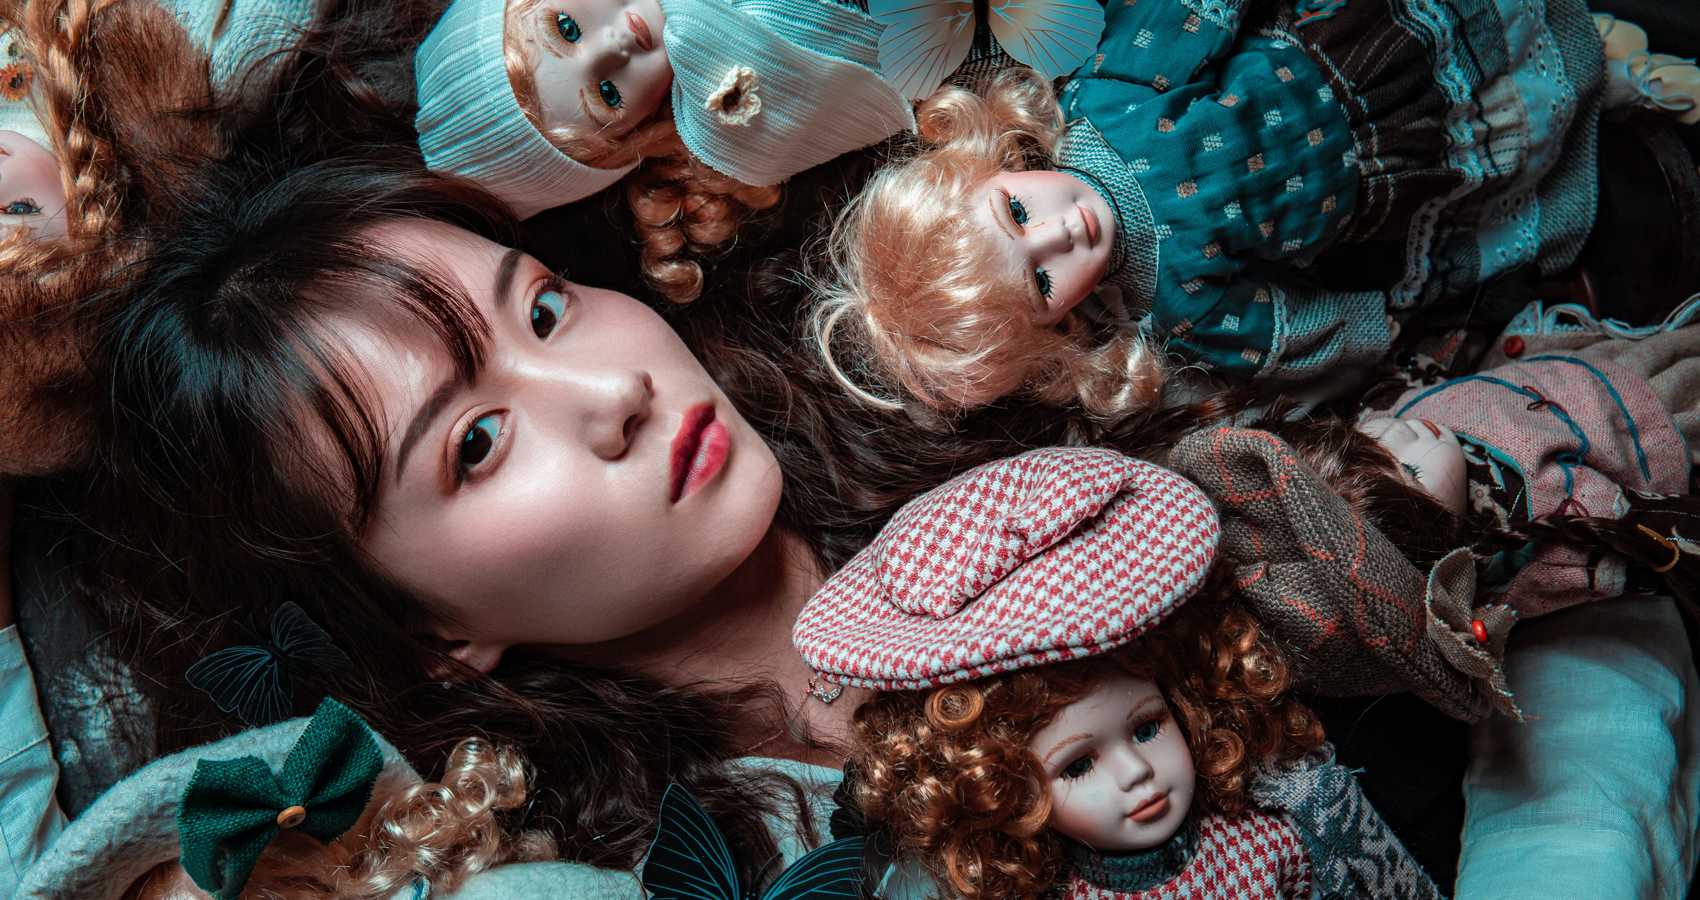 The Living Doll, flash fiction by P.A. O'Neil at Spillwords.com